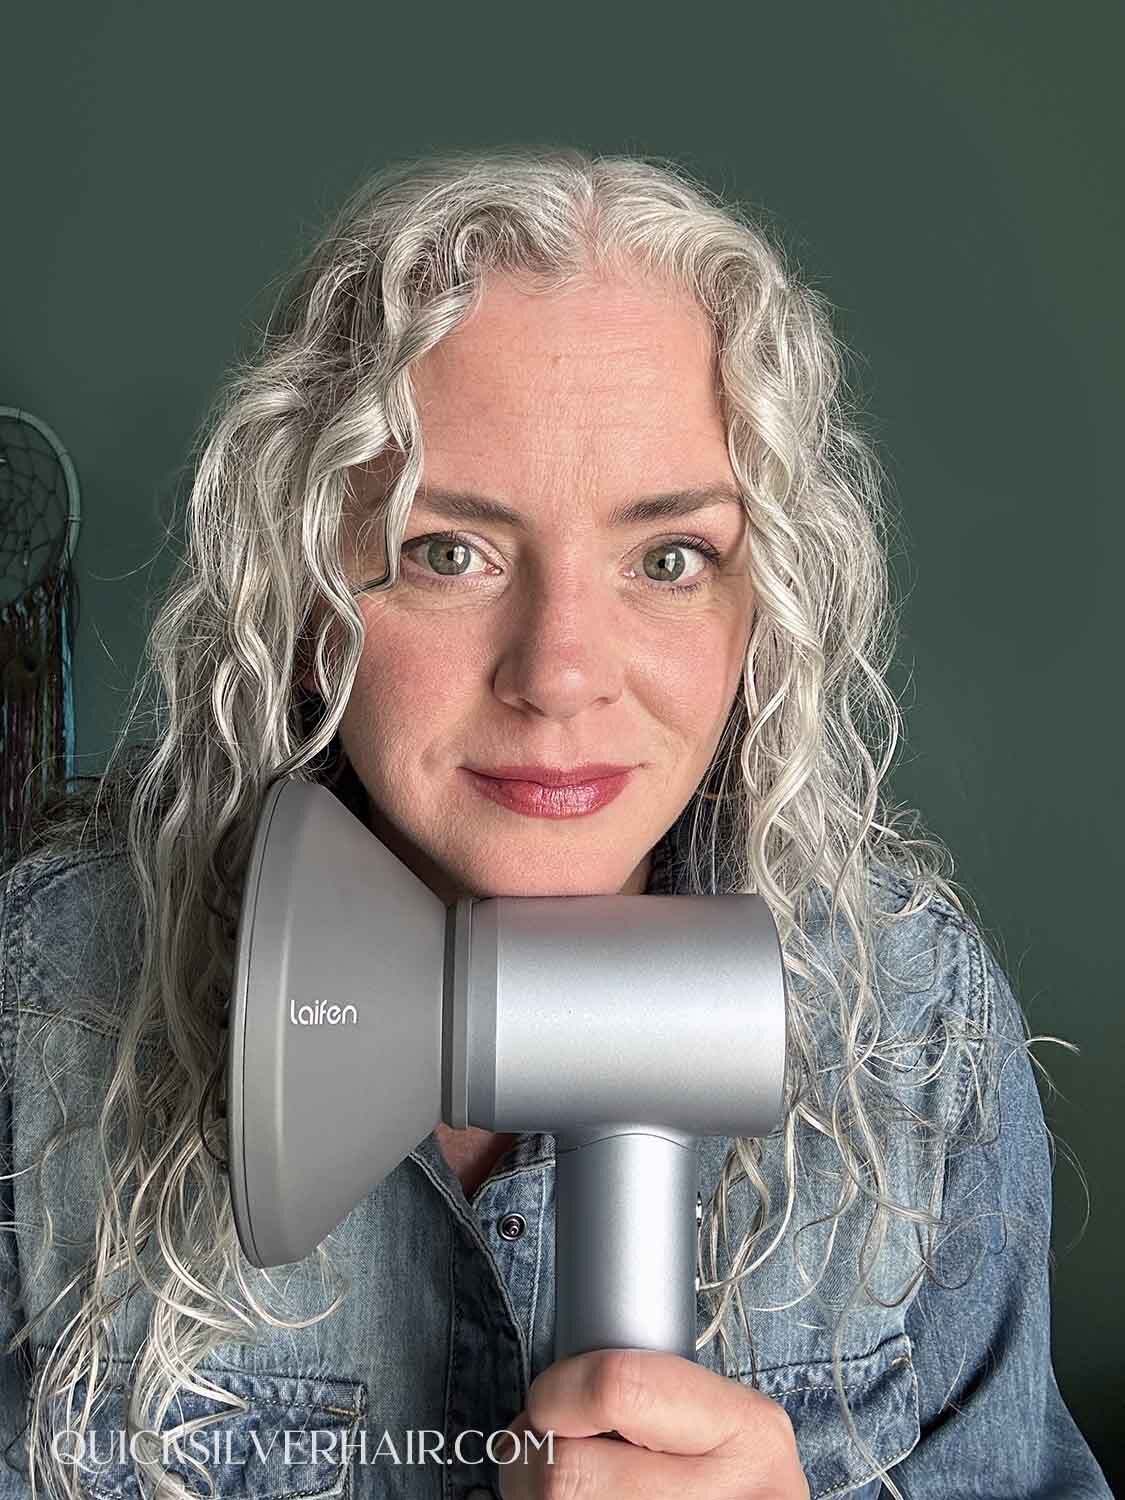 Photo of Joli with the Laifen swift hair dryer